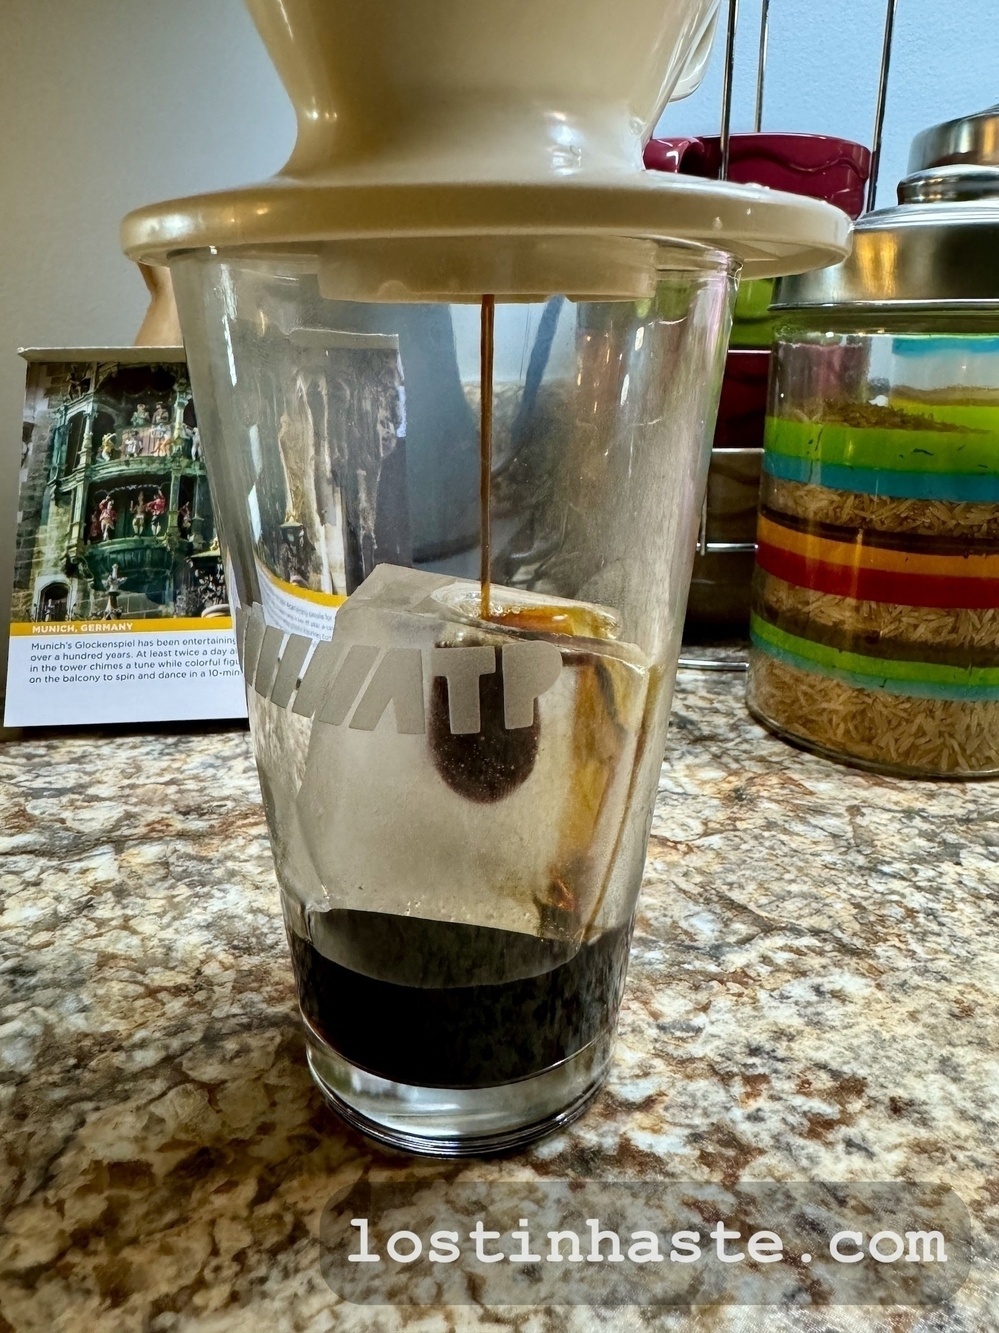 A coffee filter drips into a glass carafe on a kitchen countertop, flanked by colorful canisters. Website address 'lostinahaste.com' is visible.